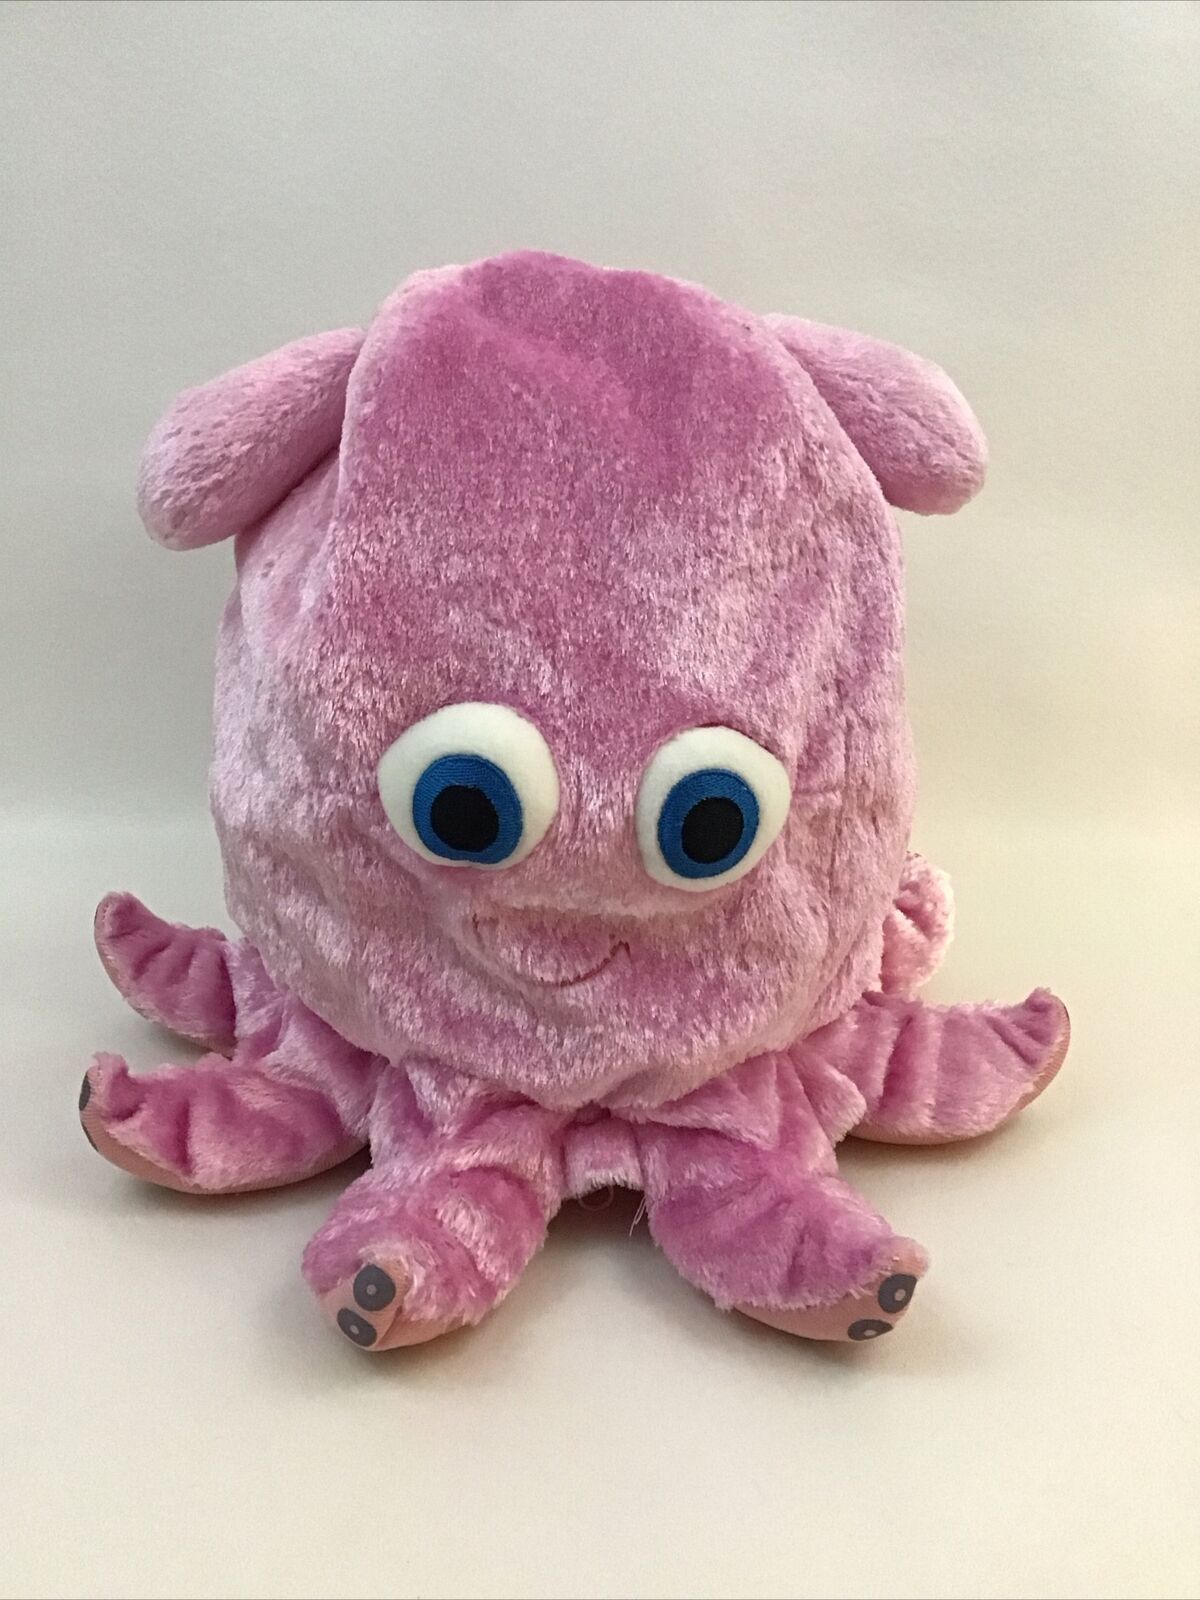 Disney Store Finding Nemo Pearl Pink Plush Sleeper Keeper Zippered For Pjs 9”